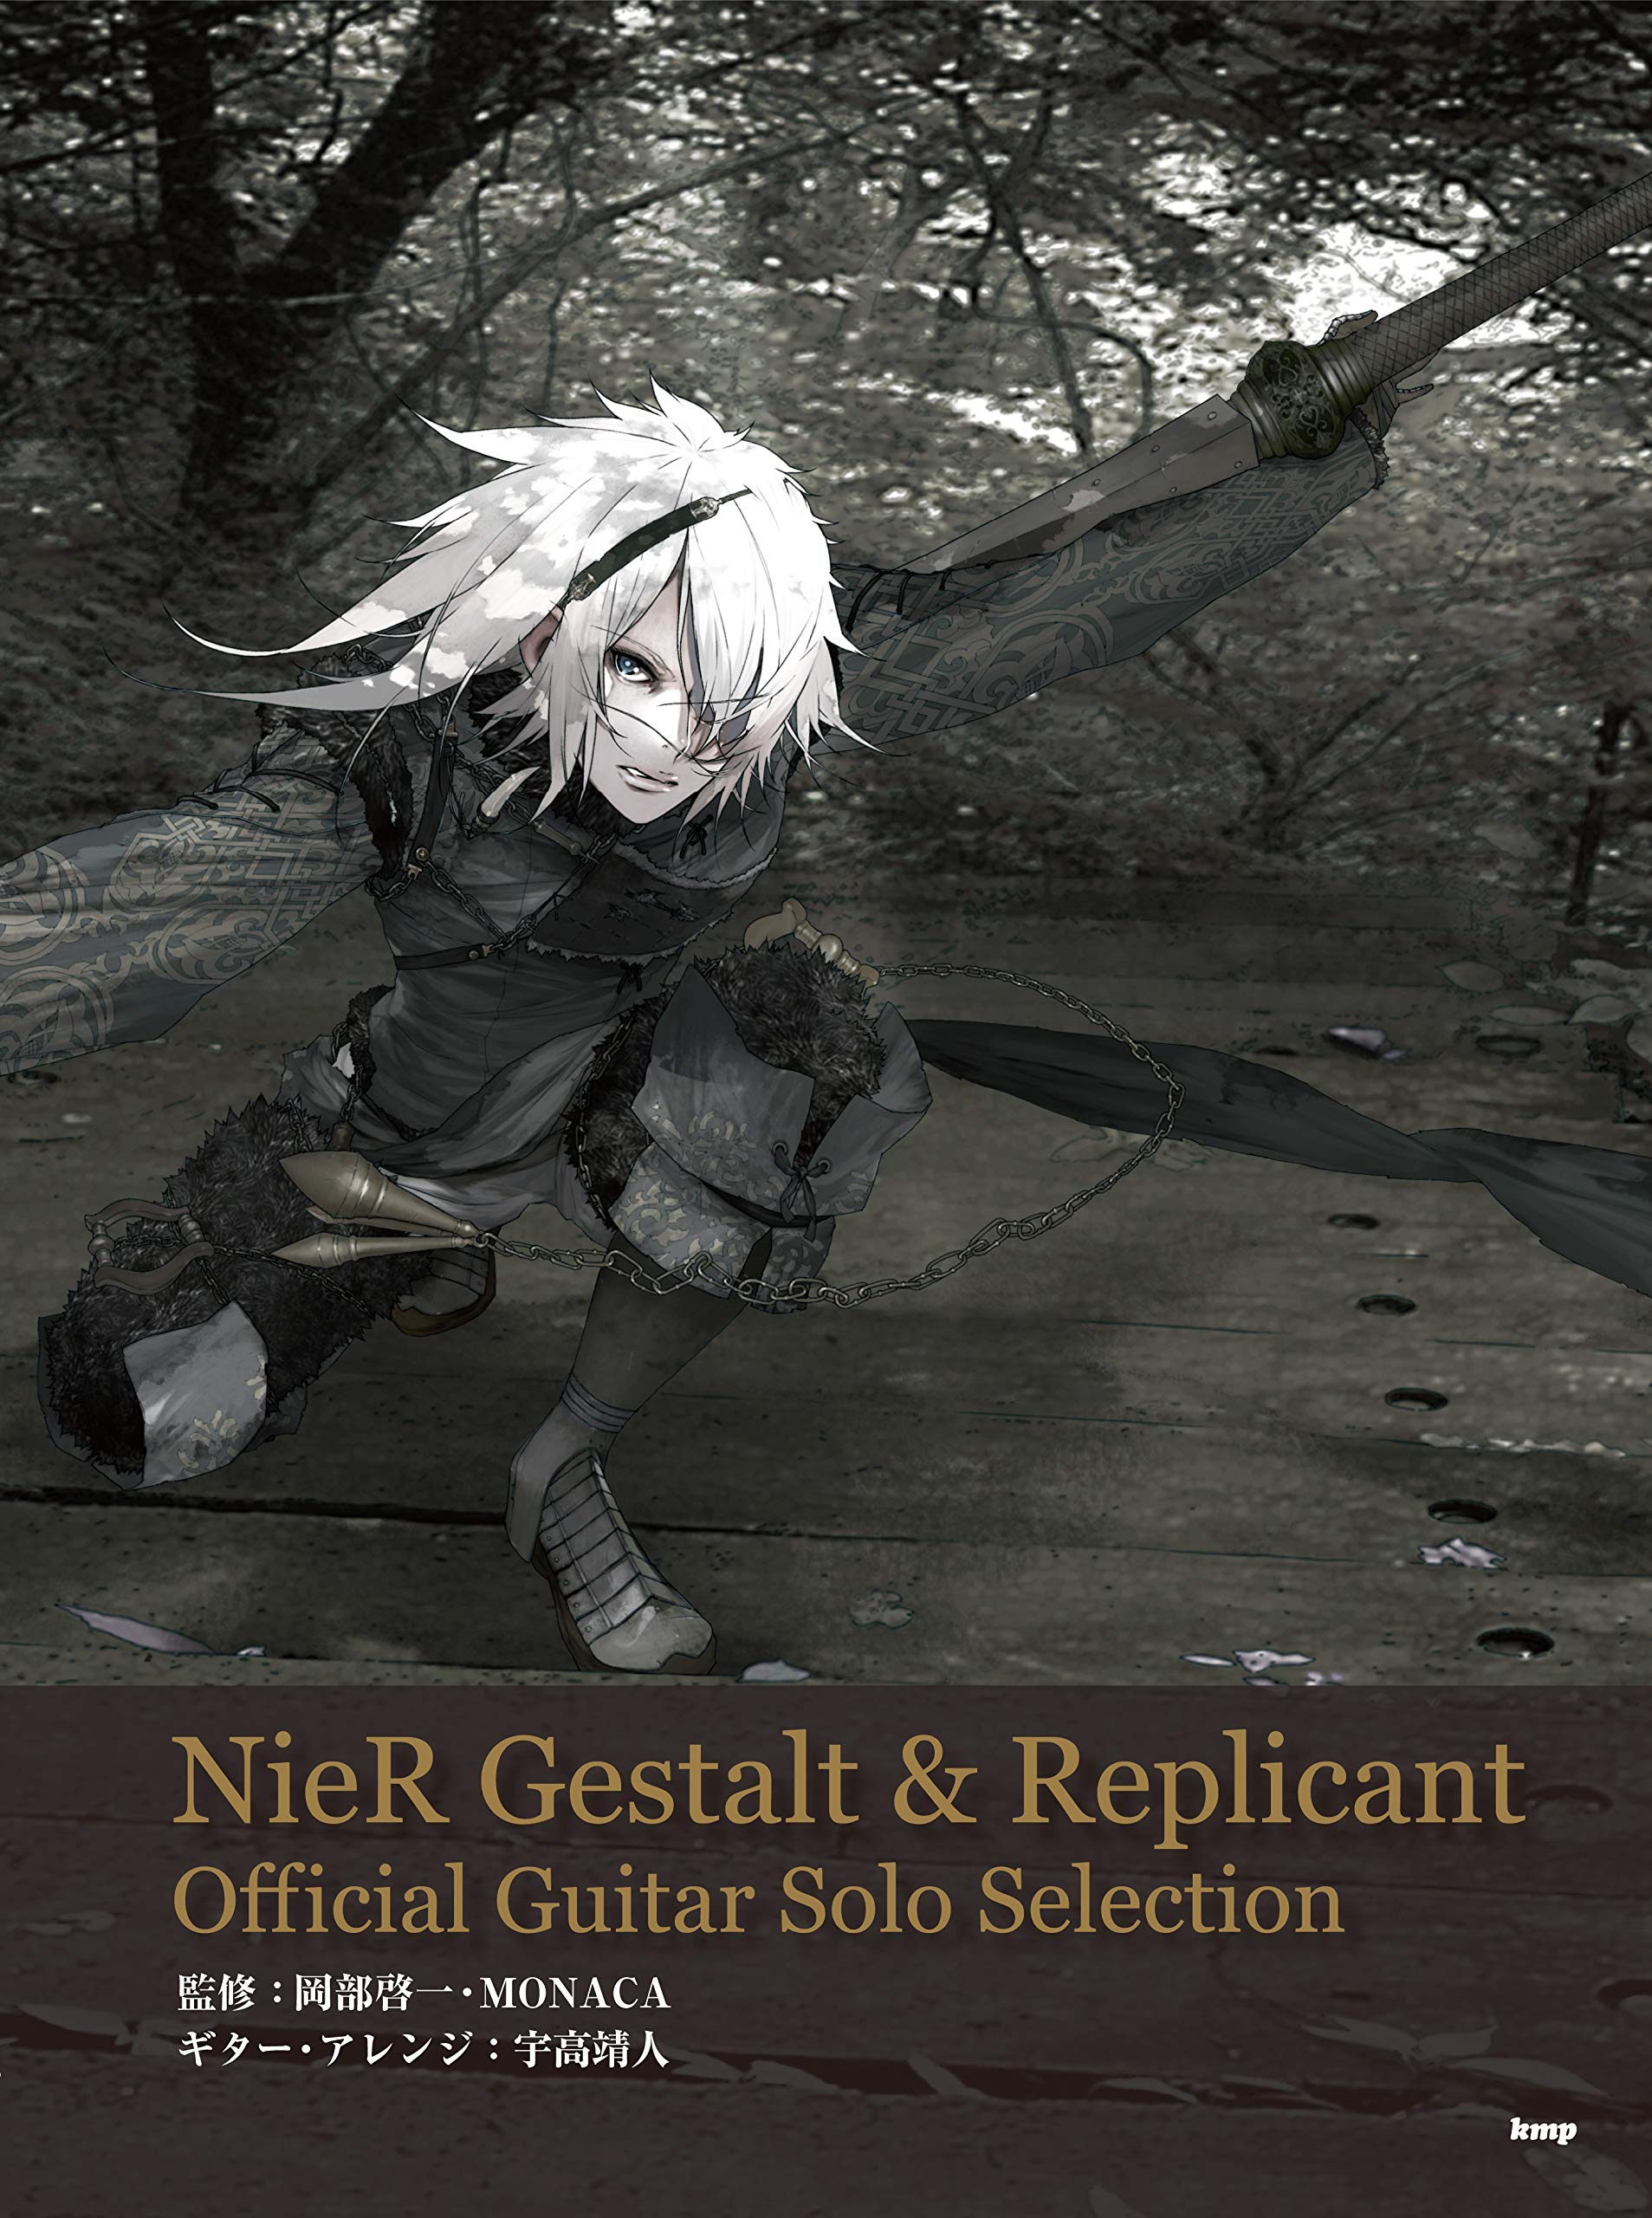 NieR Replicant and NieR Gestalt Official Guitar Solo Selection with Keiichi Okabe and MONACA